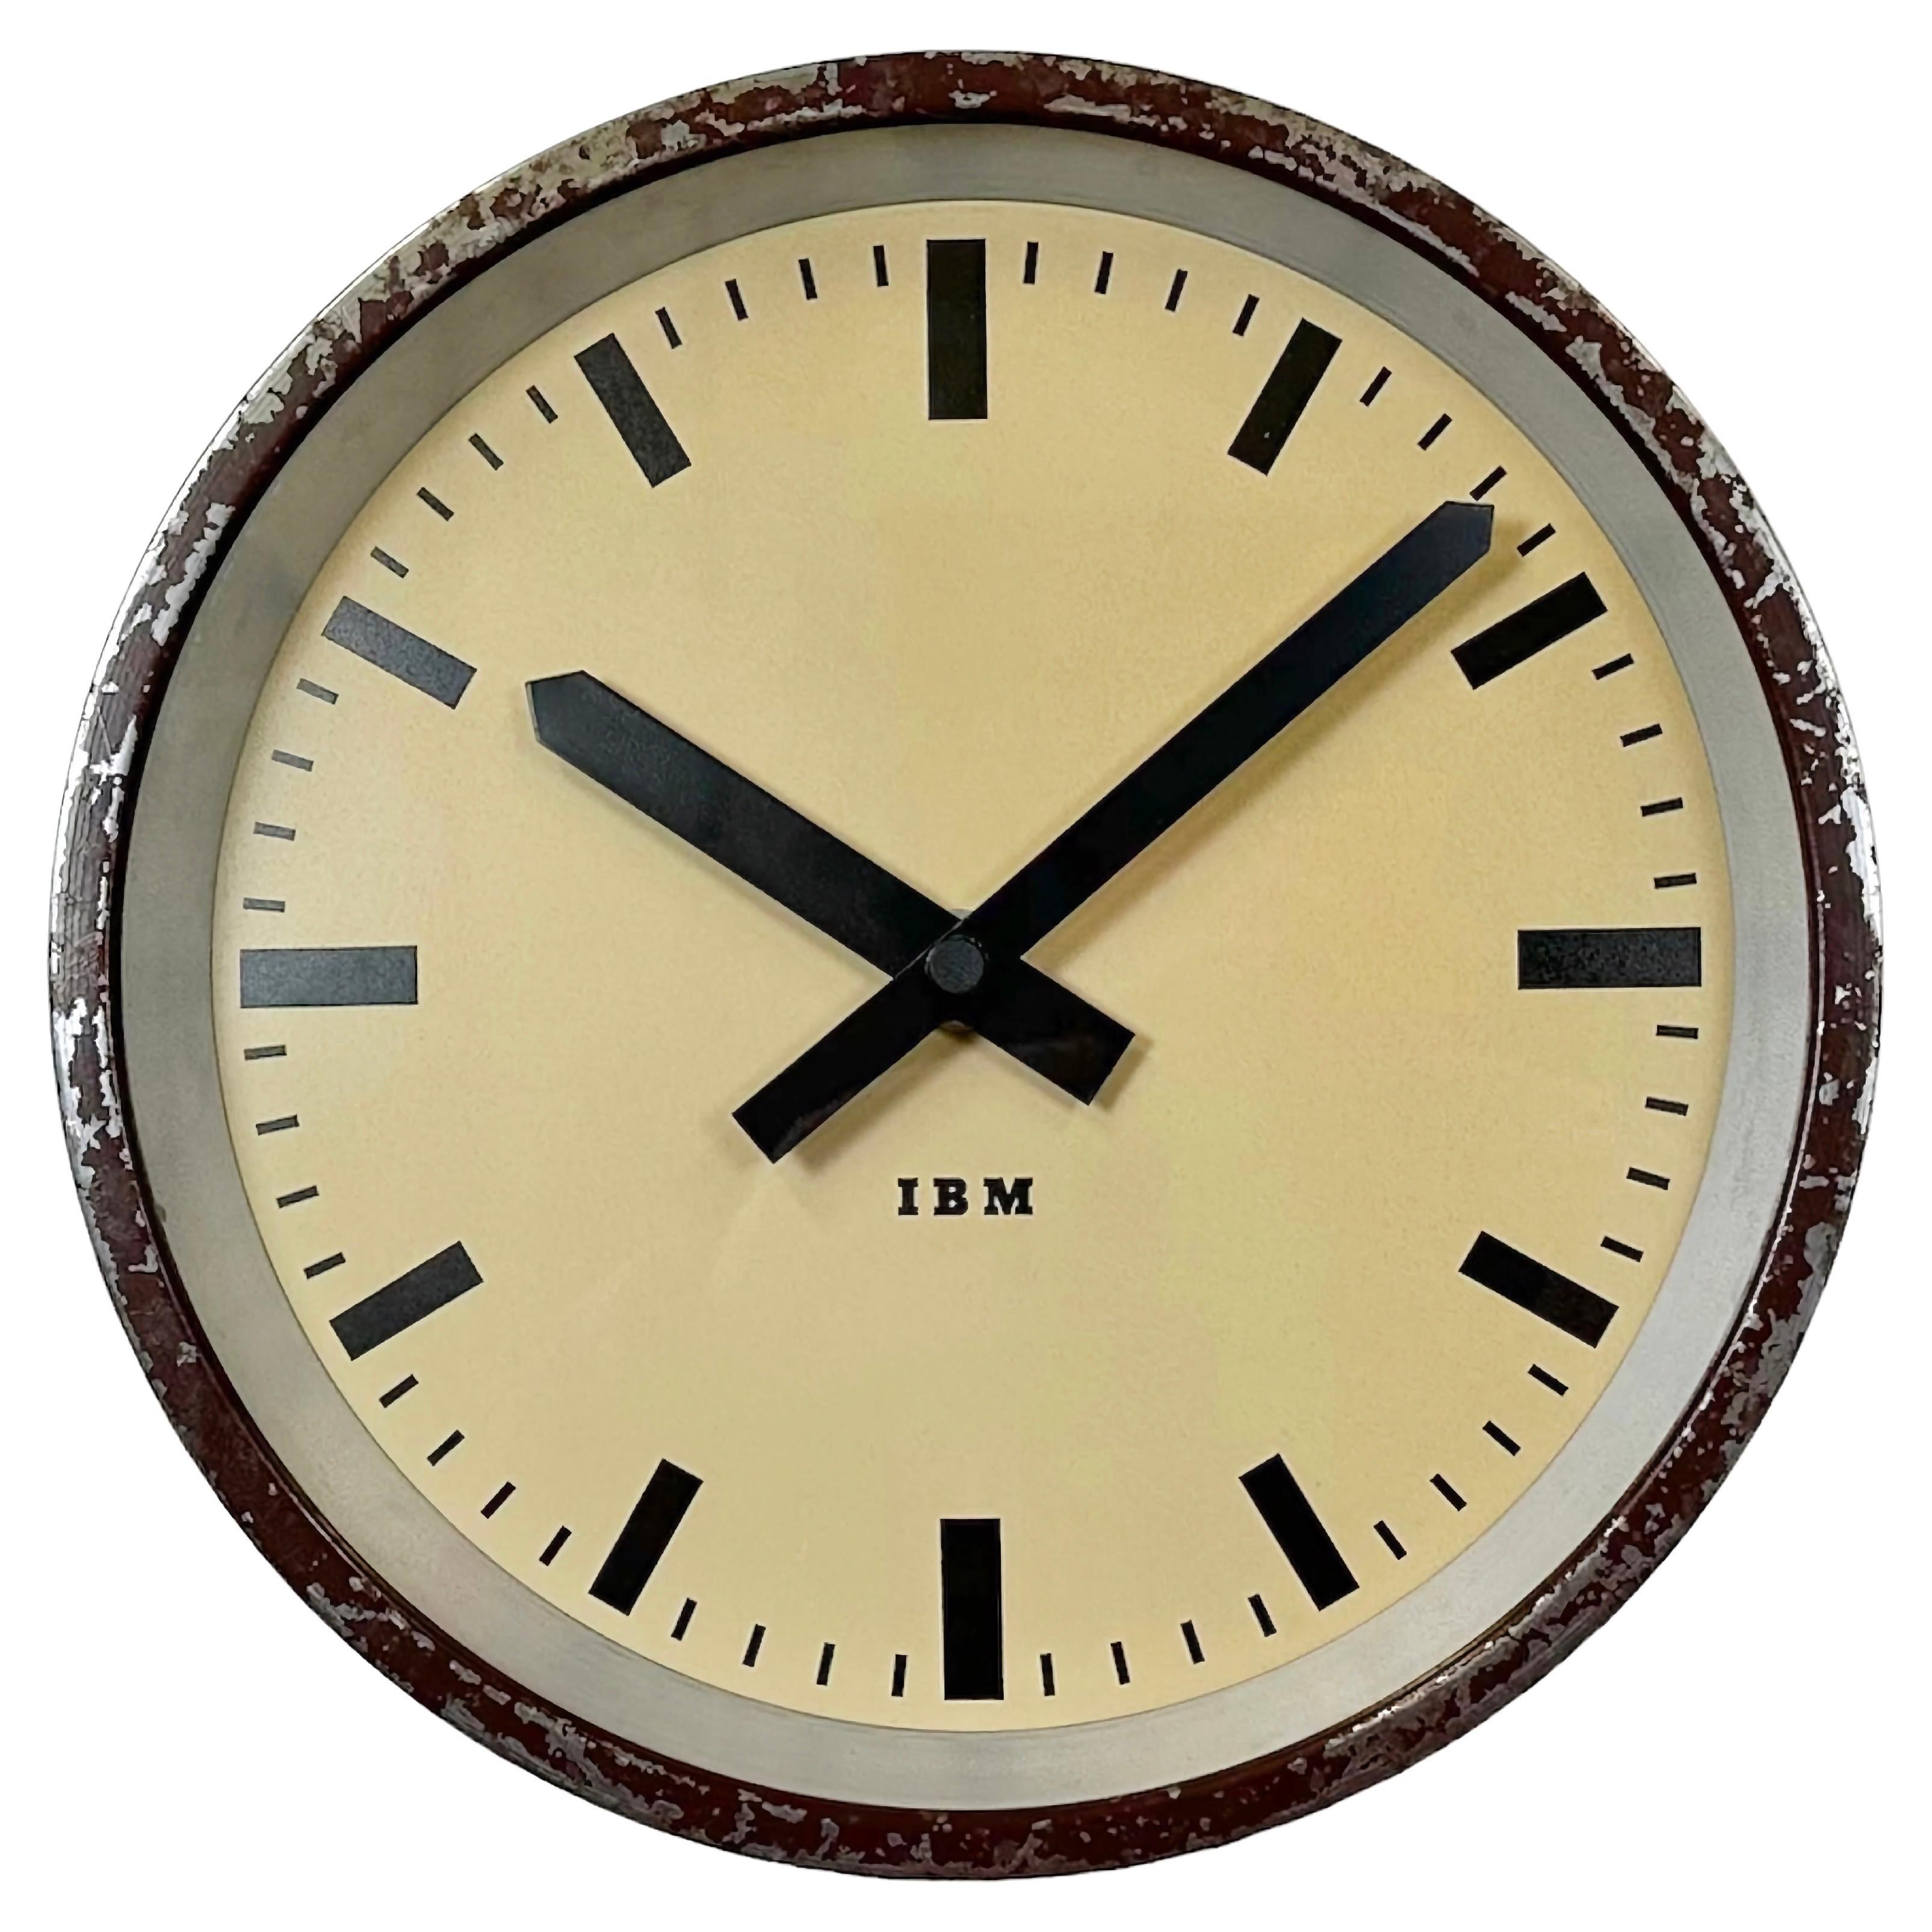 Brown Industrial Factory Wall Clock from IBM, 1950s